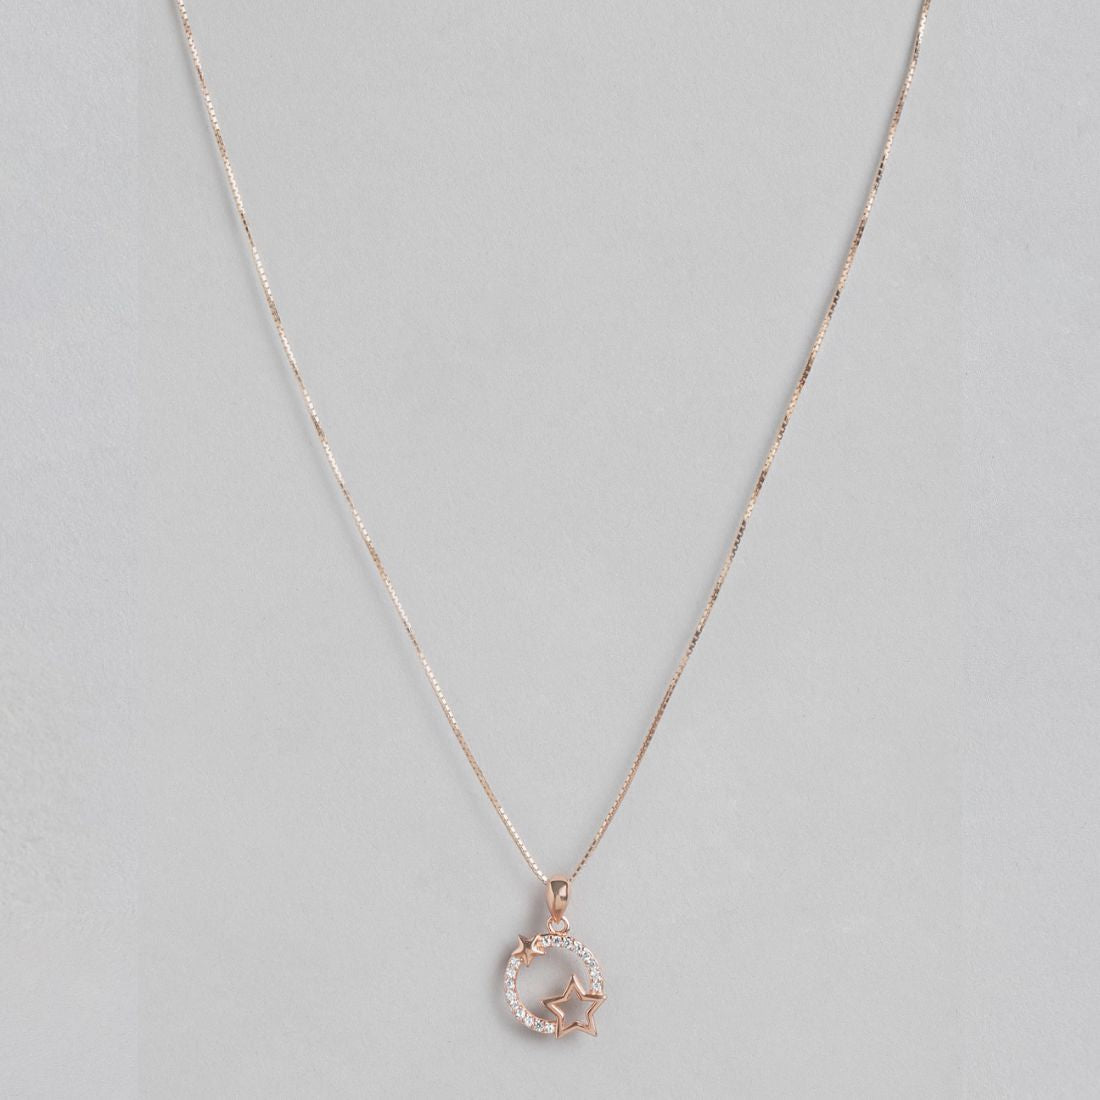 Stellar Radiance 925 Sterling Silver Rose Gold Star Pendant with Chain